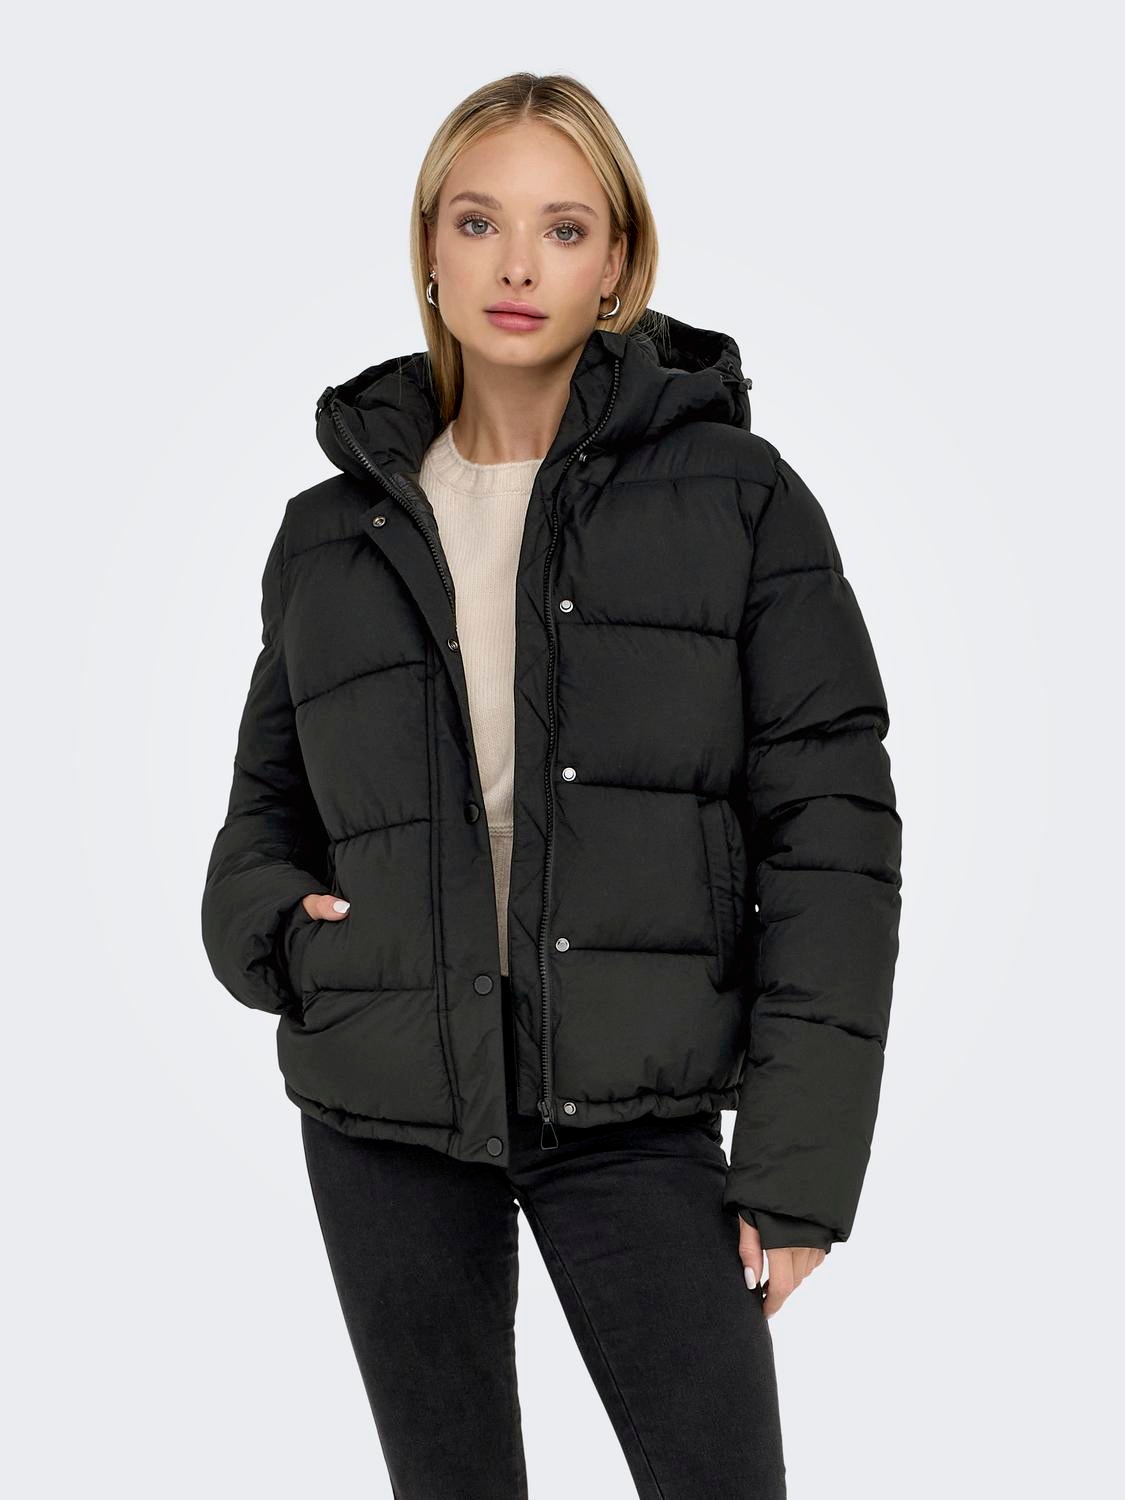 https://images.only.com/15287909/4318648/003/only-chaquetasacolchadascuellolevantado-negro.jpg?v=3450a25088d86aa6368c55078b2f9be4&format=webp&width=1280&quality=90&key=25-0-3